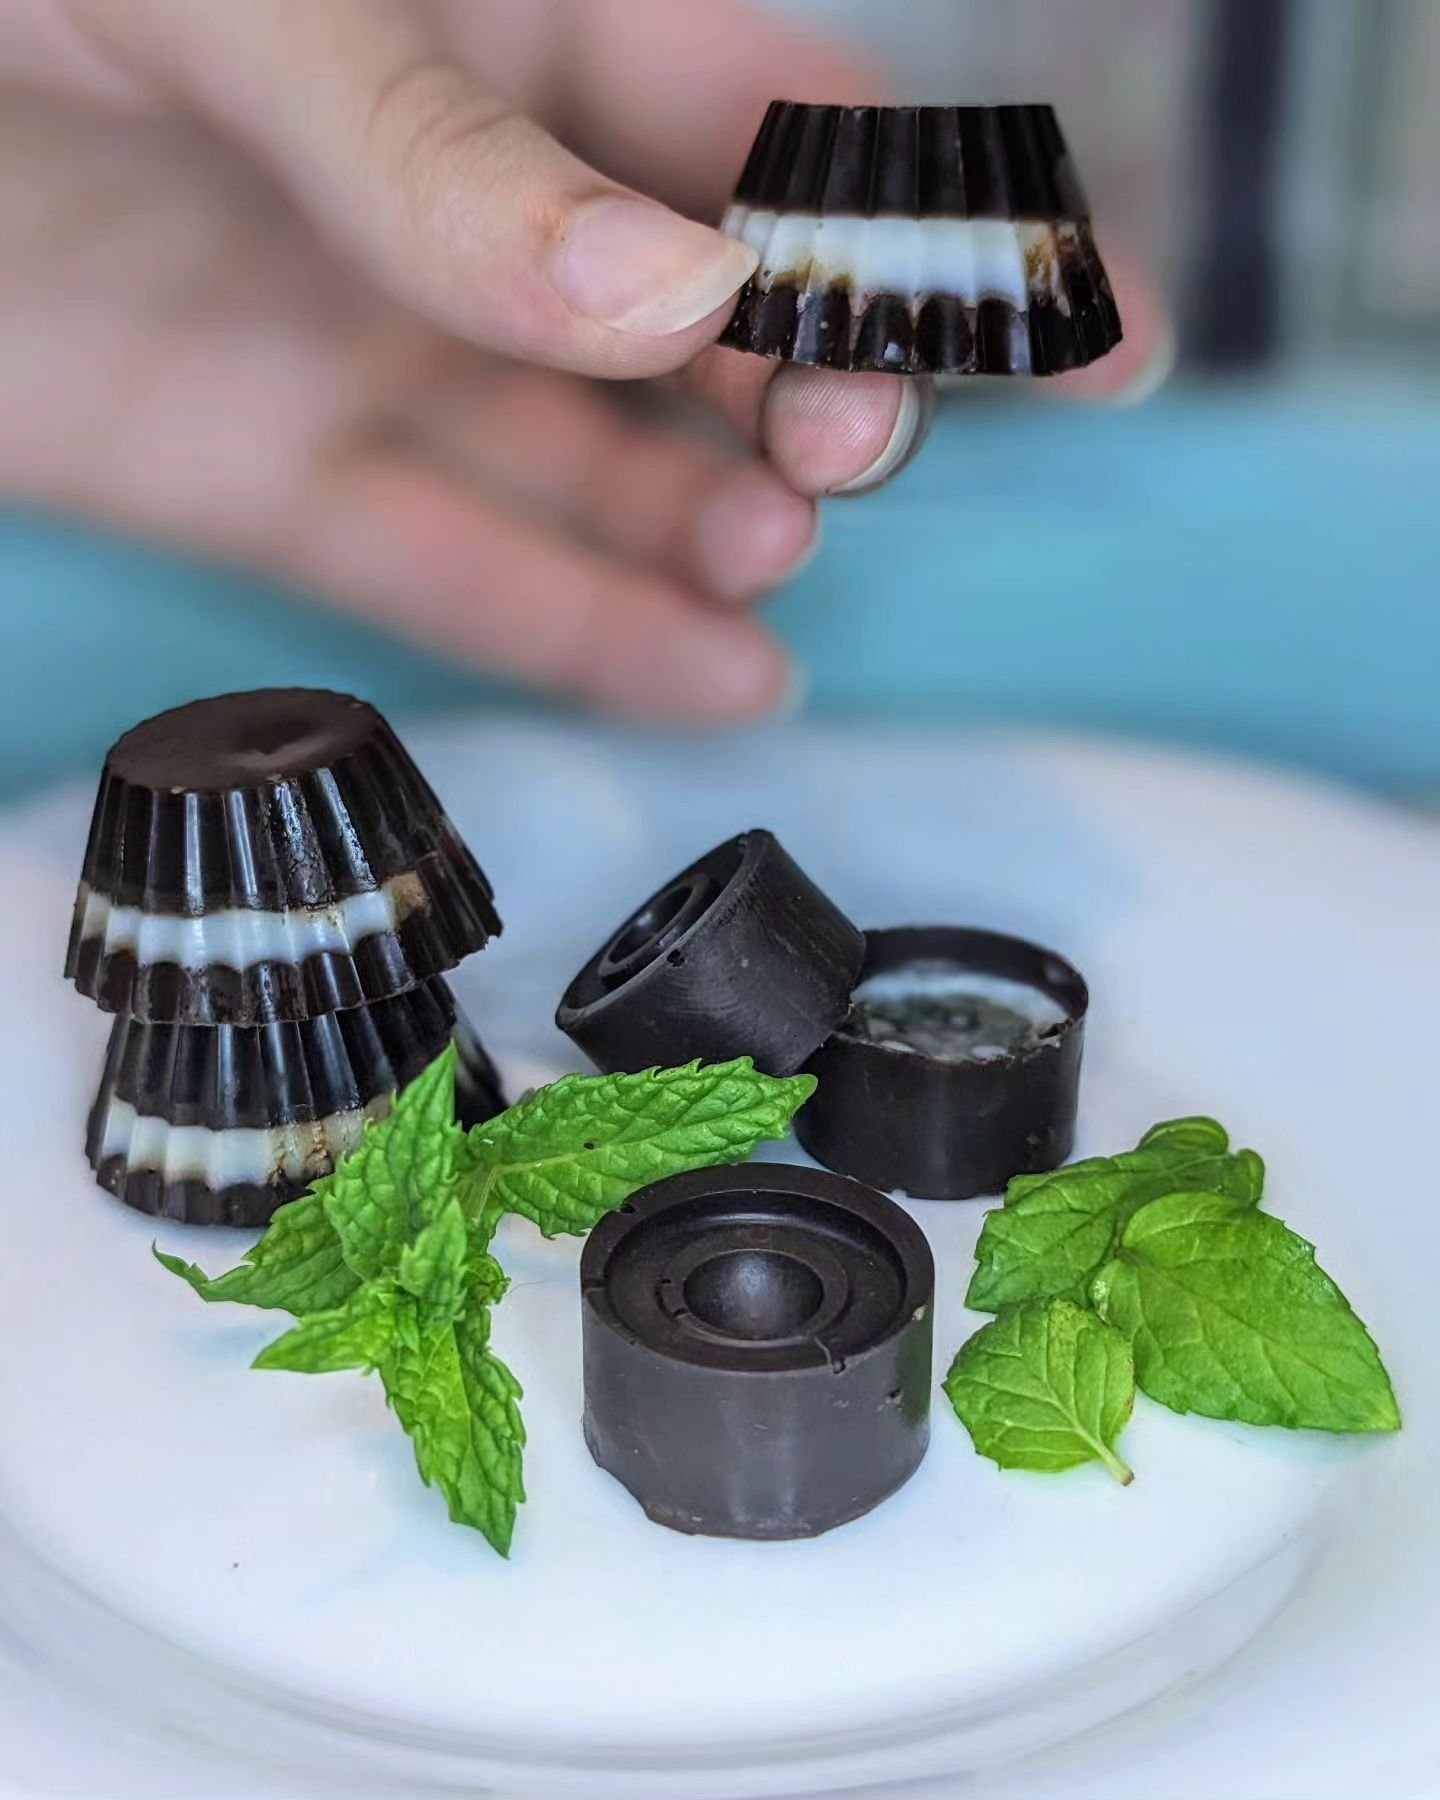 Made these lovely dark chocolate spearmint patties today in class using dried spearmint.

I love combining cacao with herbs to make confections not only because the combos are tasty, but also because there are so many possibilities AND what an amazin